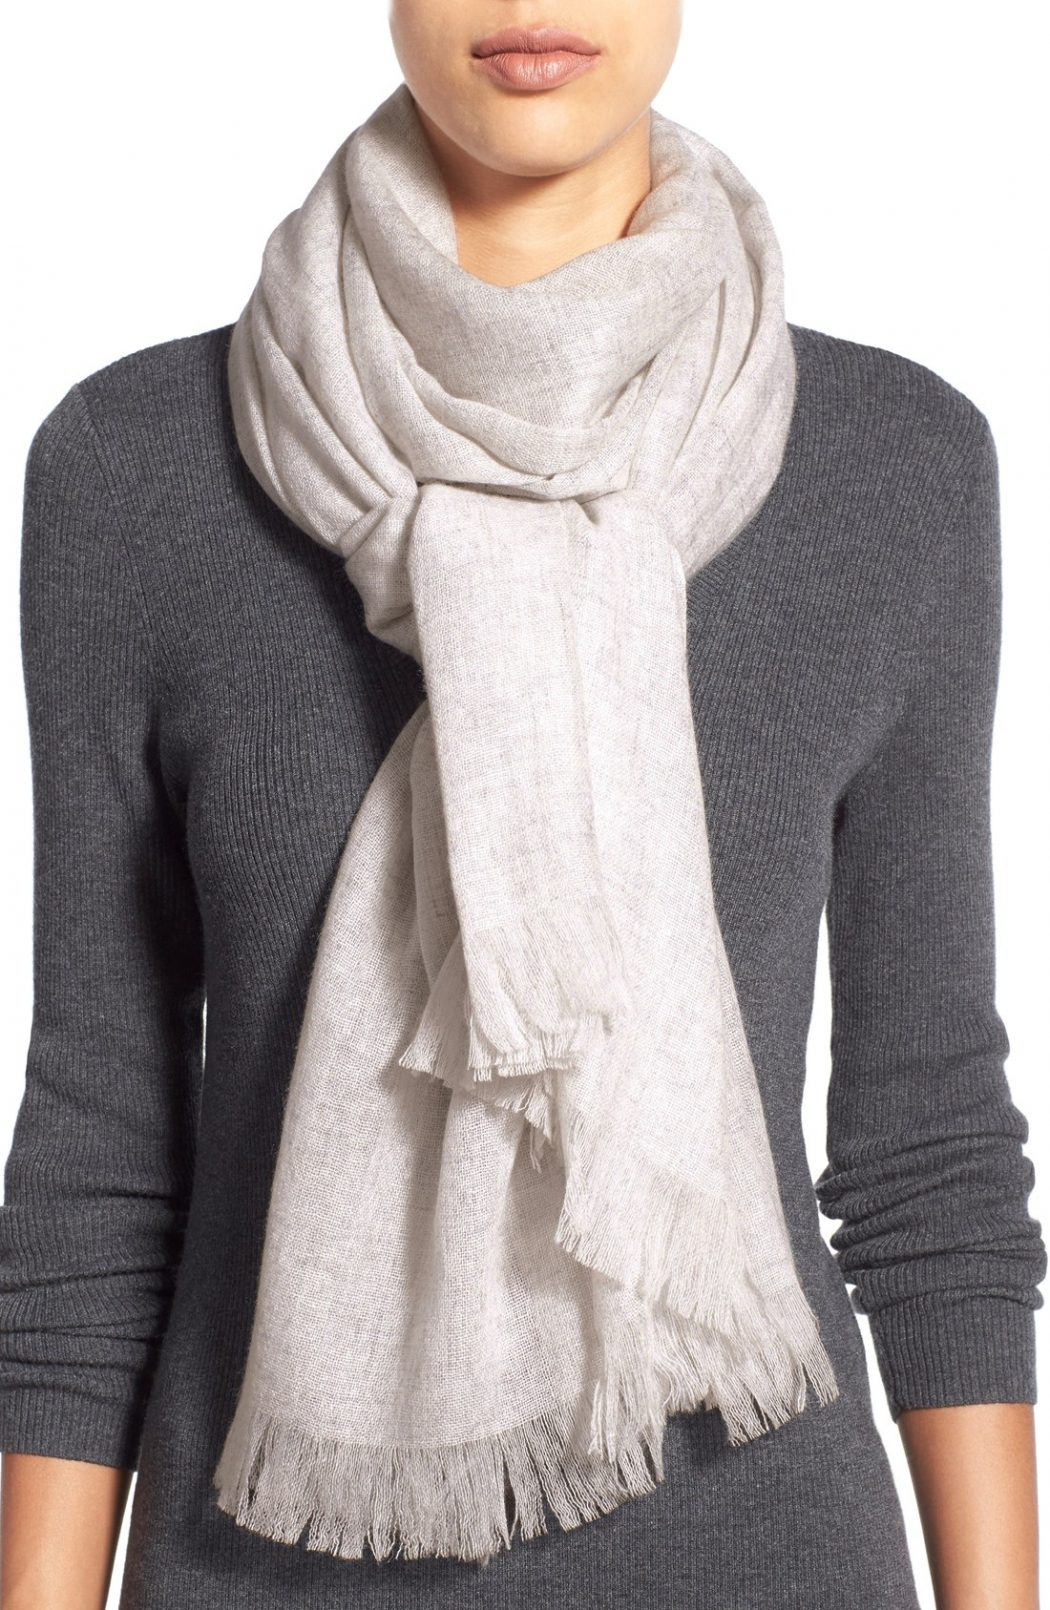 Cashmere Scarf5 22+ Elegant Scarf Trend Forecast for Winter & Fall - 14